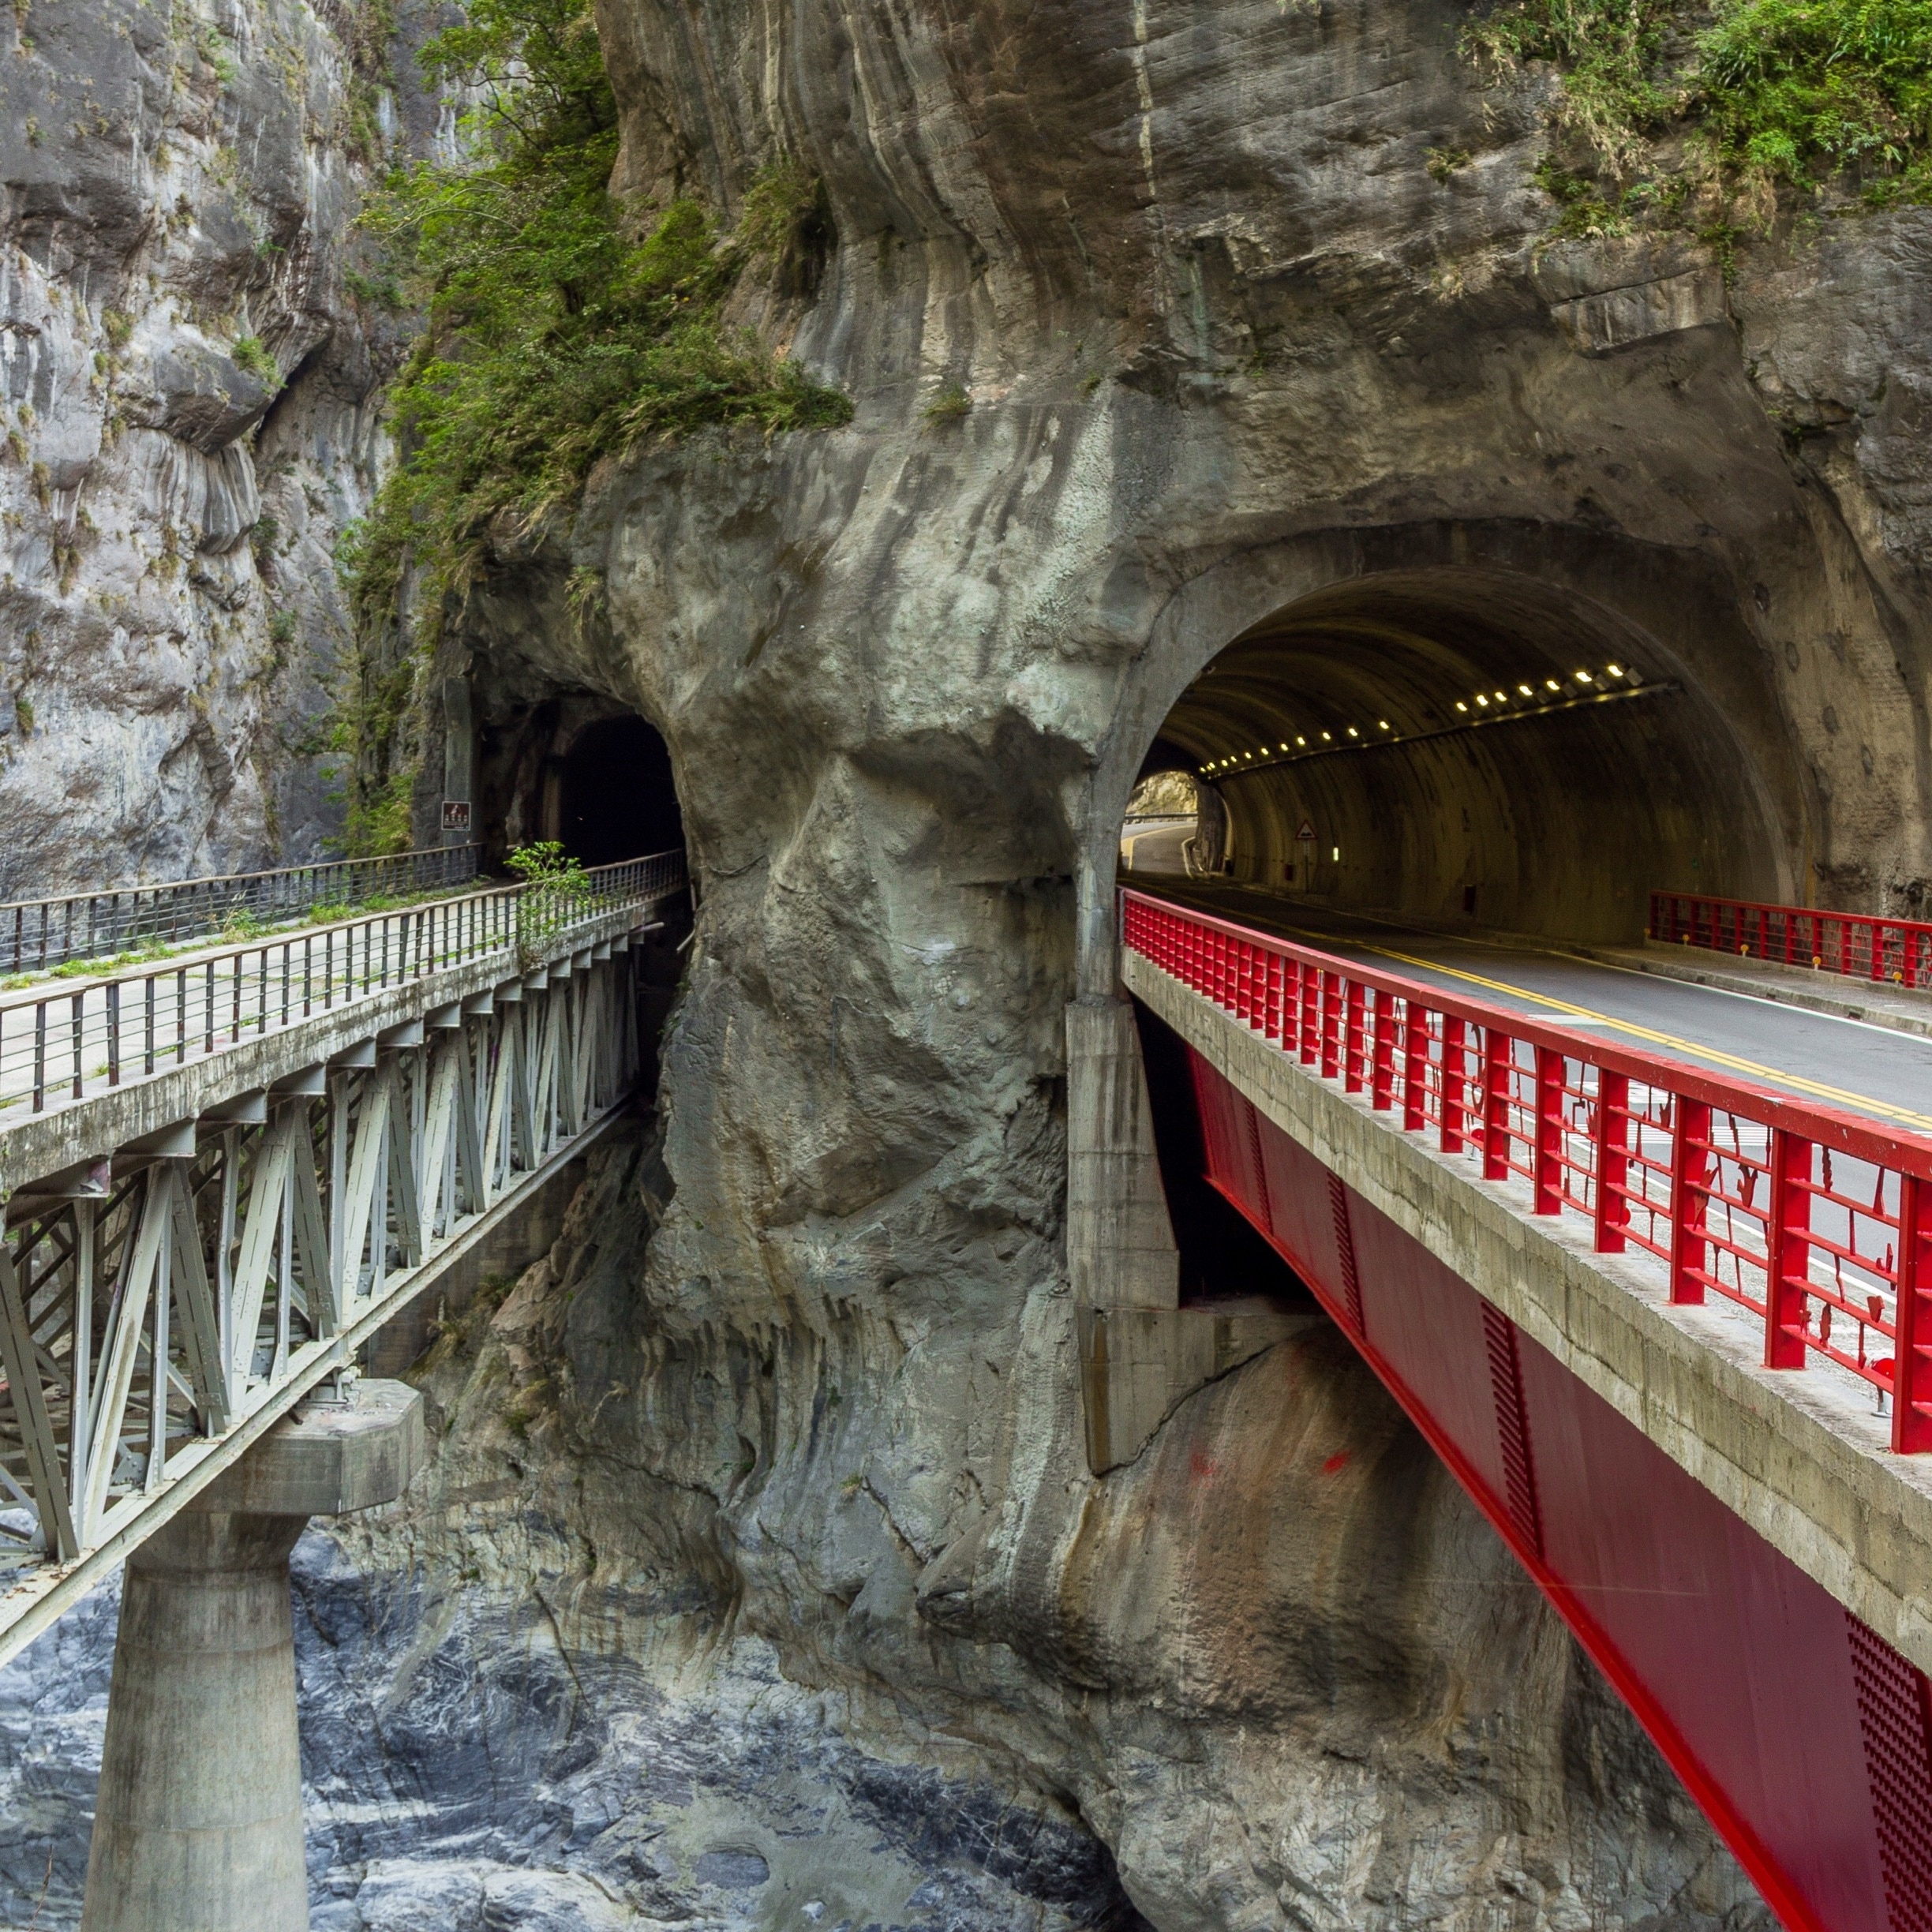 Cant miss this great photo spot as you head up the Taroko highway